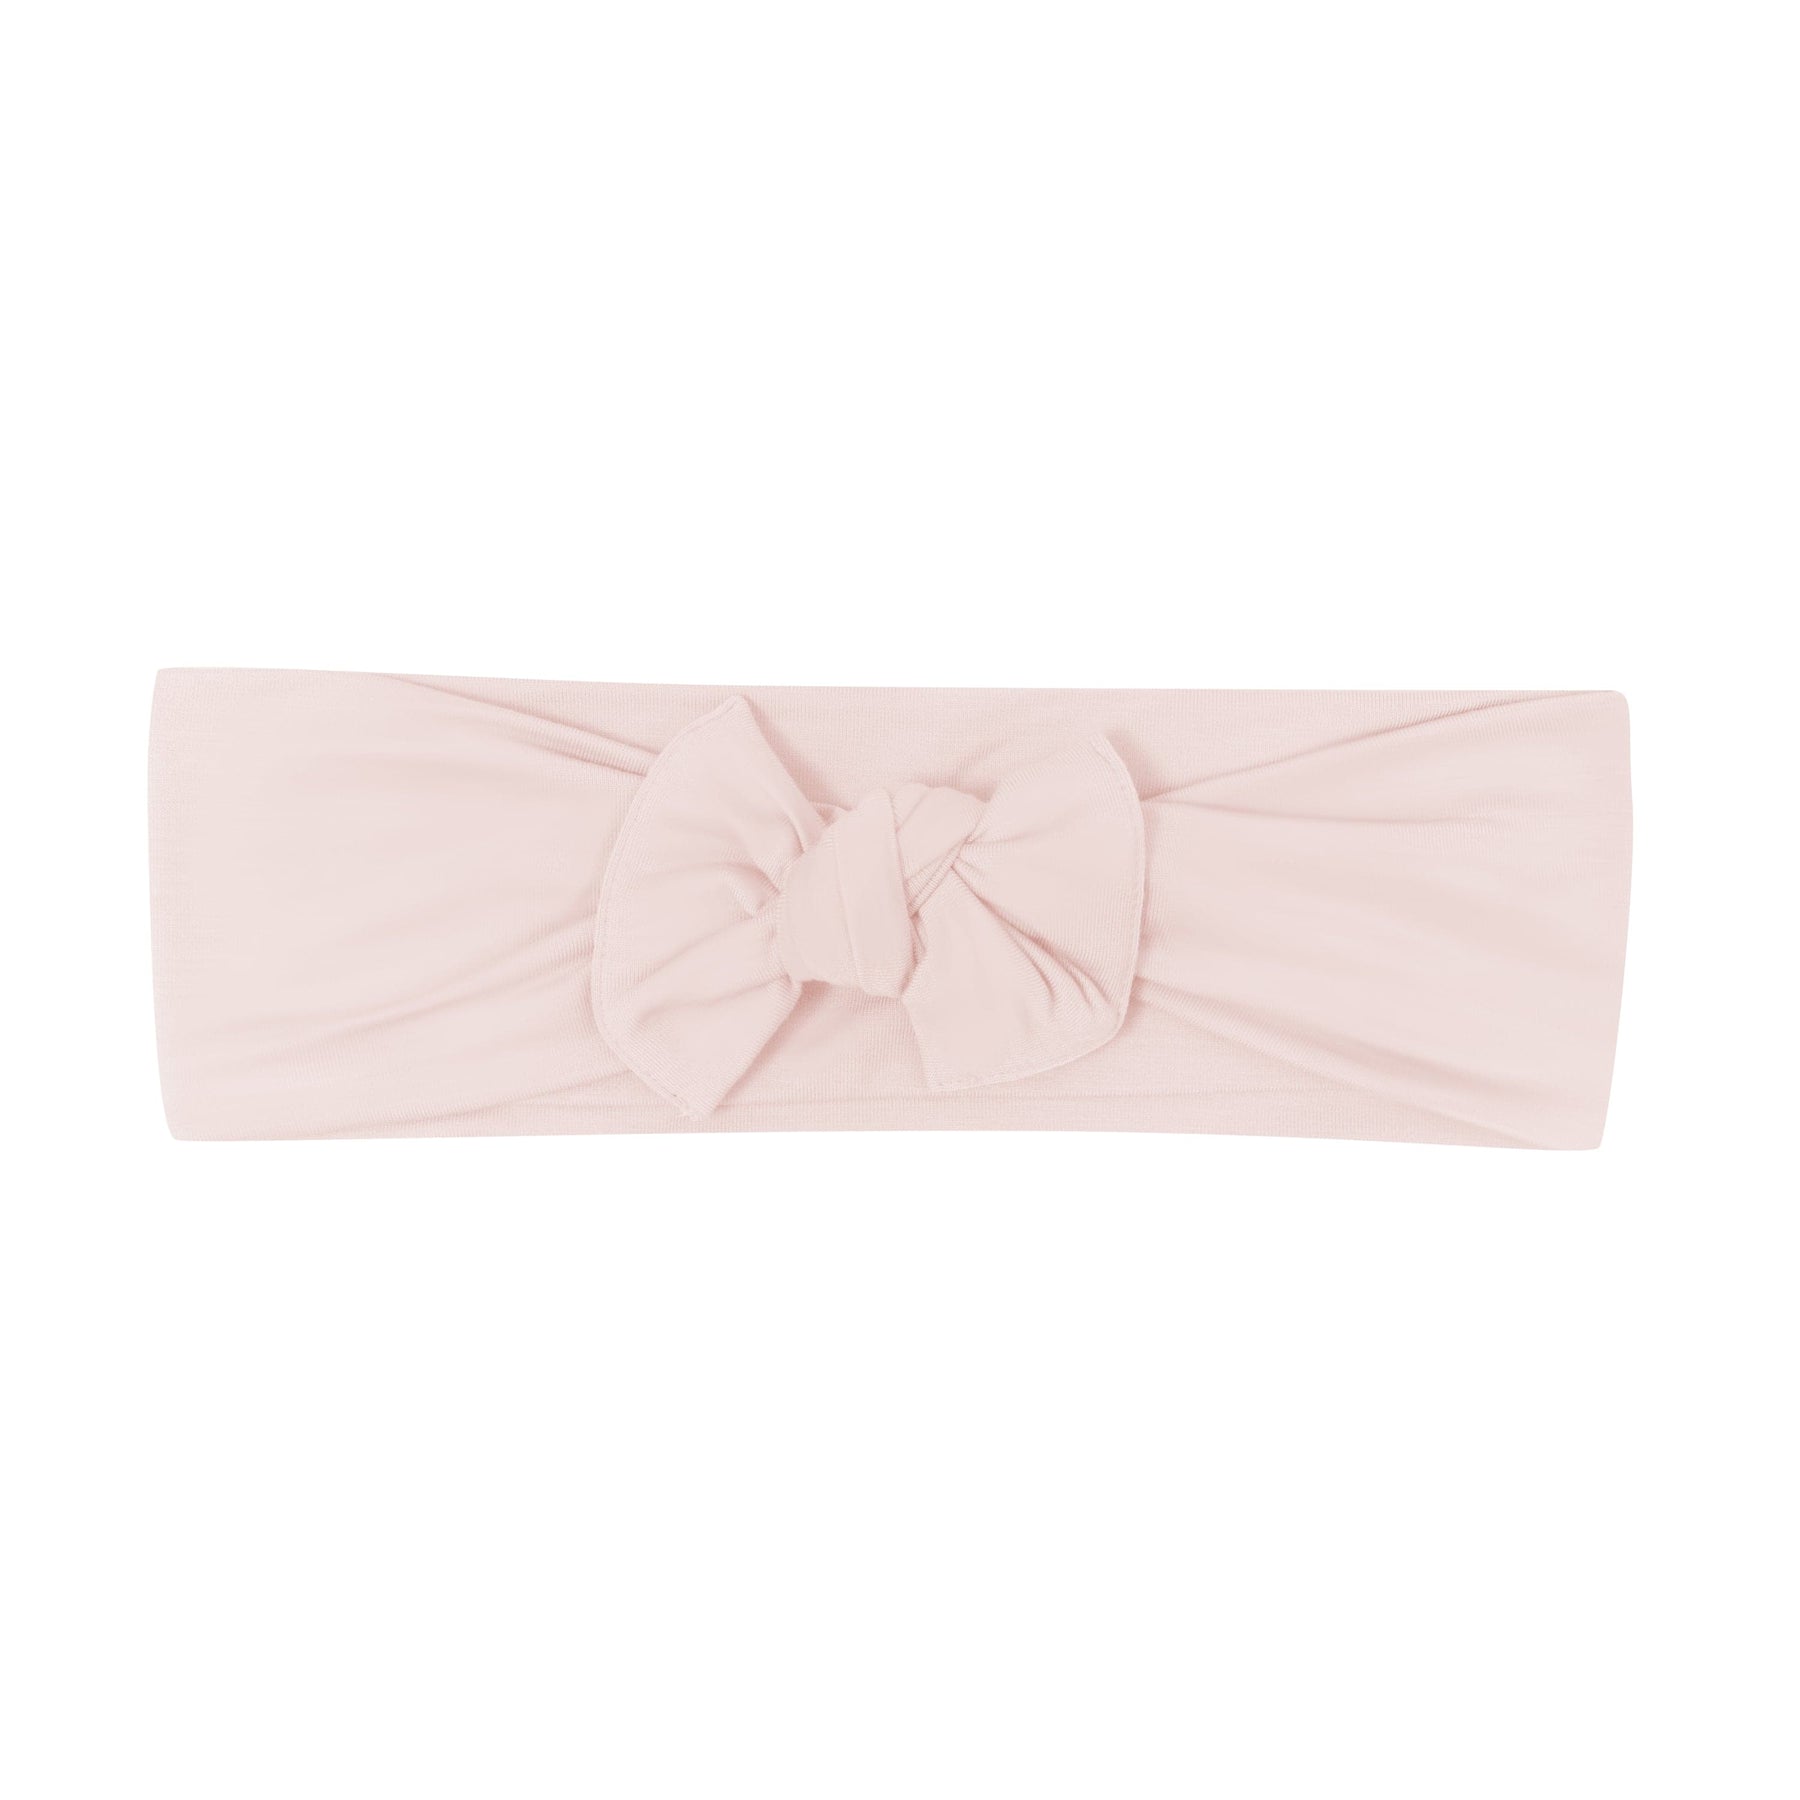 Kyte BABY Adult Bows Blush / One Size Adult Bow in Blush